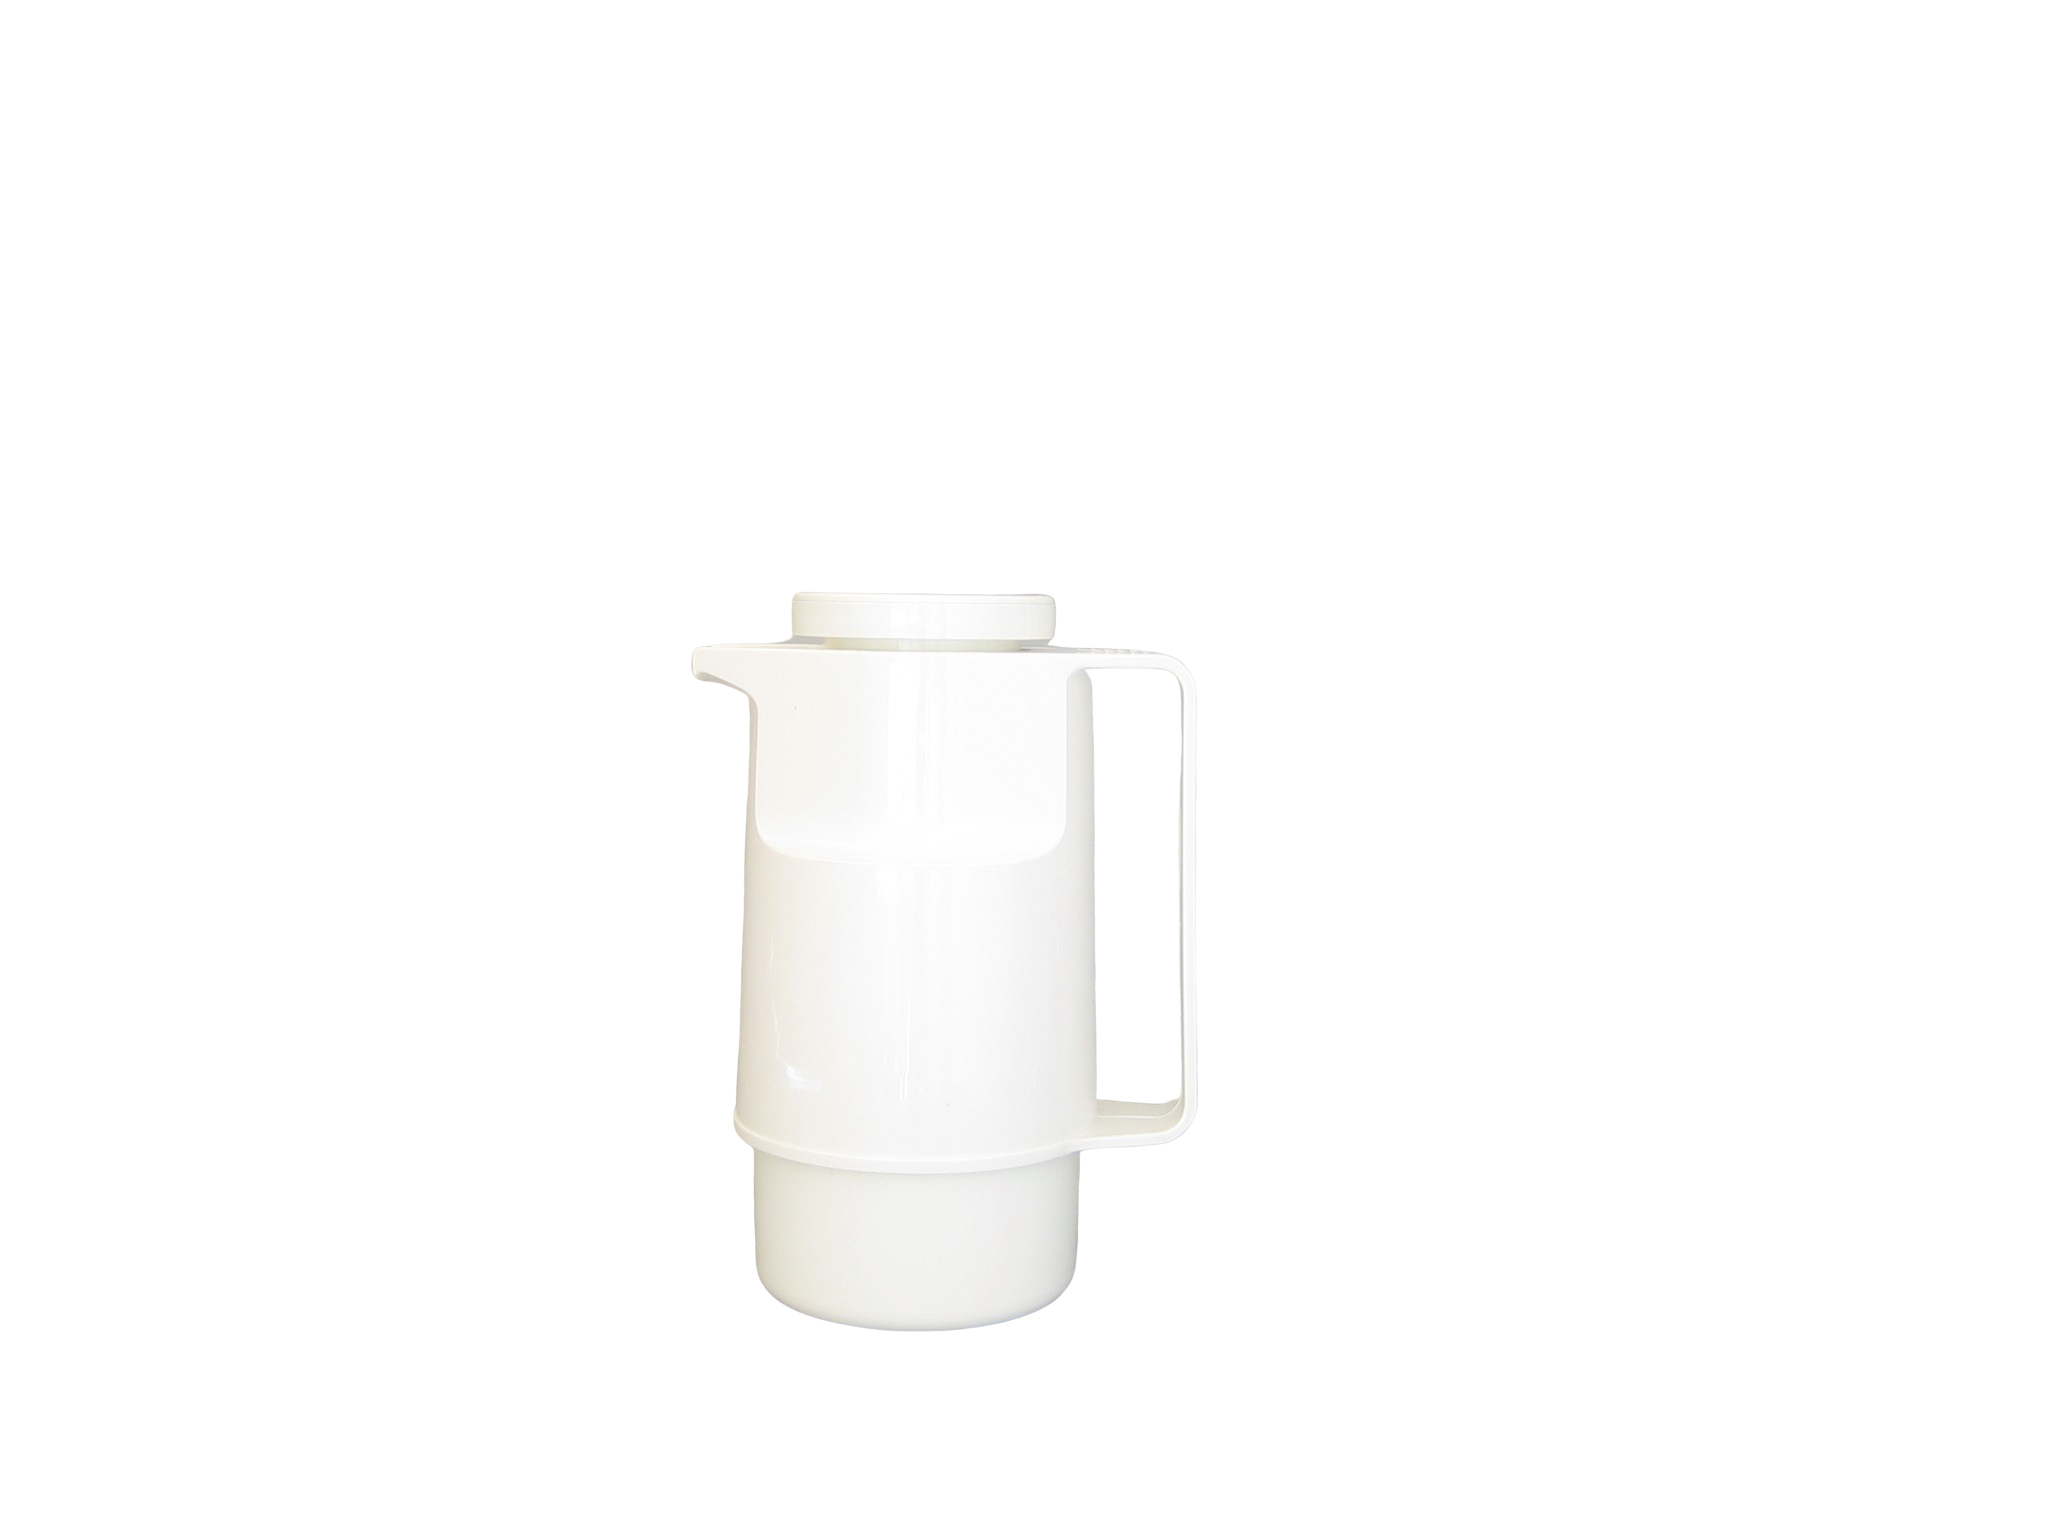 203-001 - Pichet isotherme ABS blanc 0.30 L - Isobel